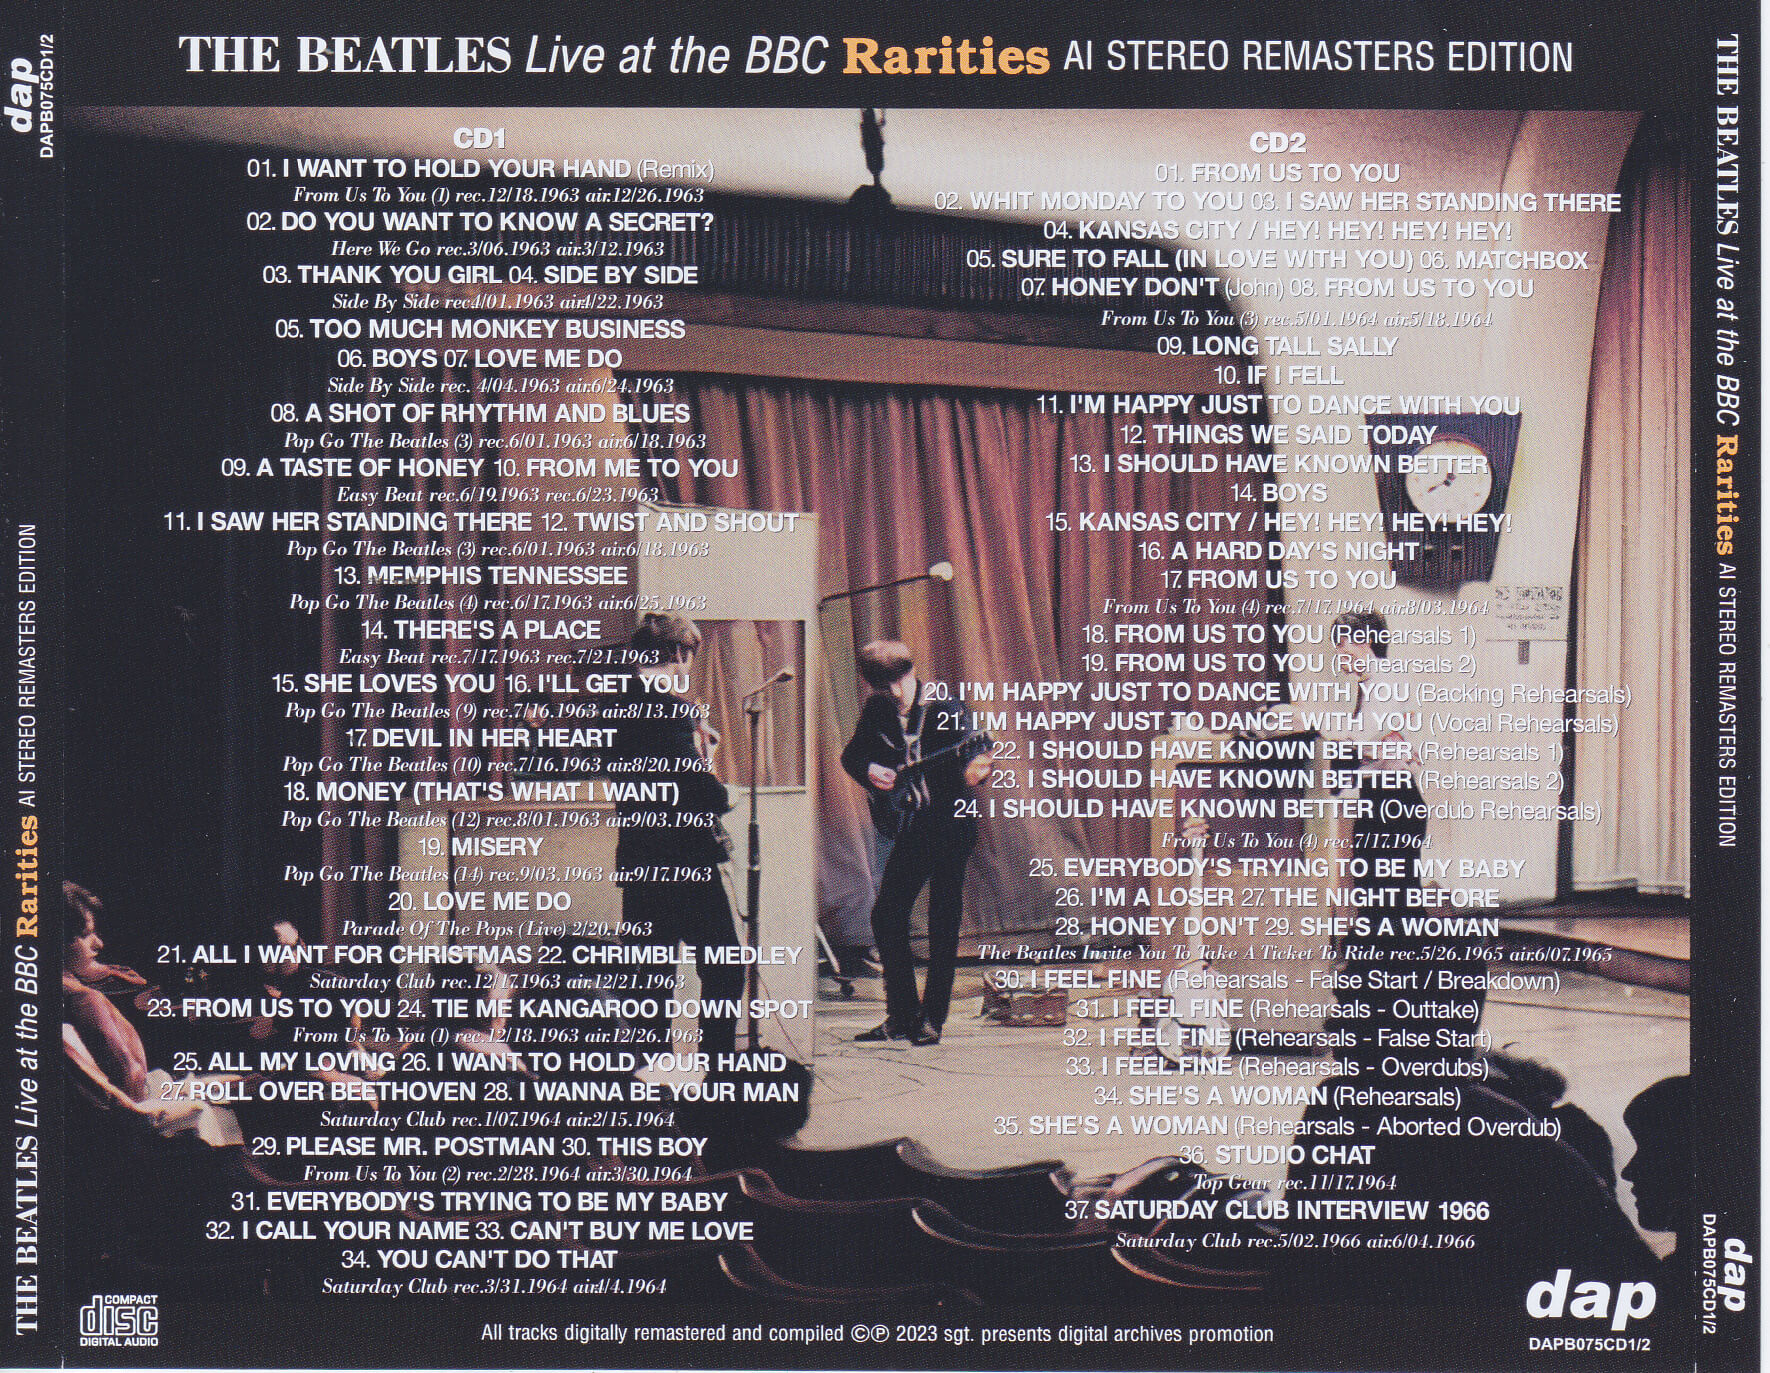 beatles-live-at-the-bbc-rarities-ai-stereo-remasters-edition2.jpg